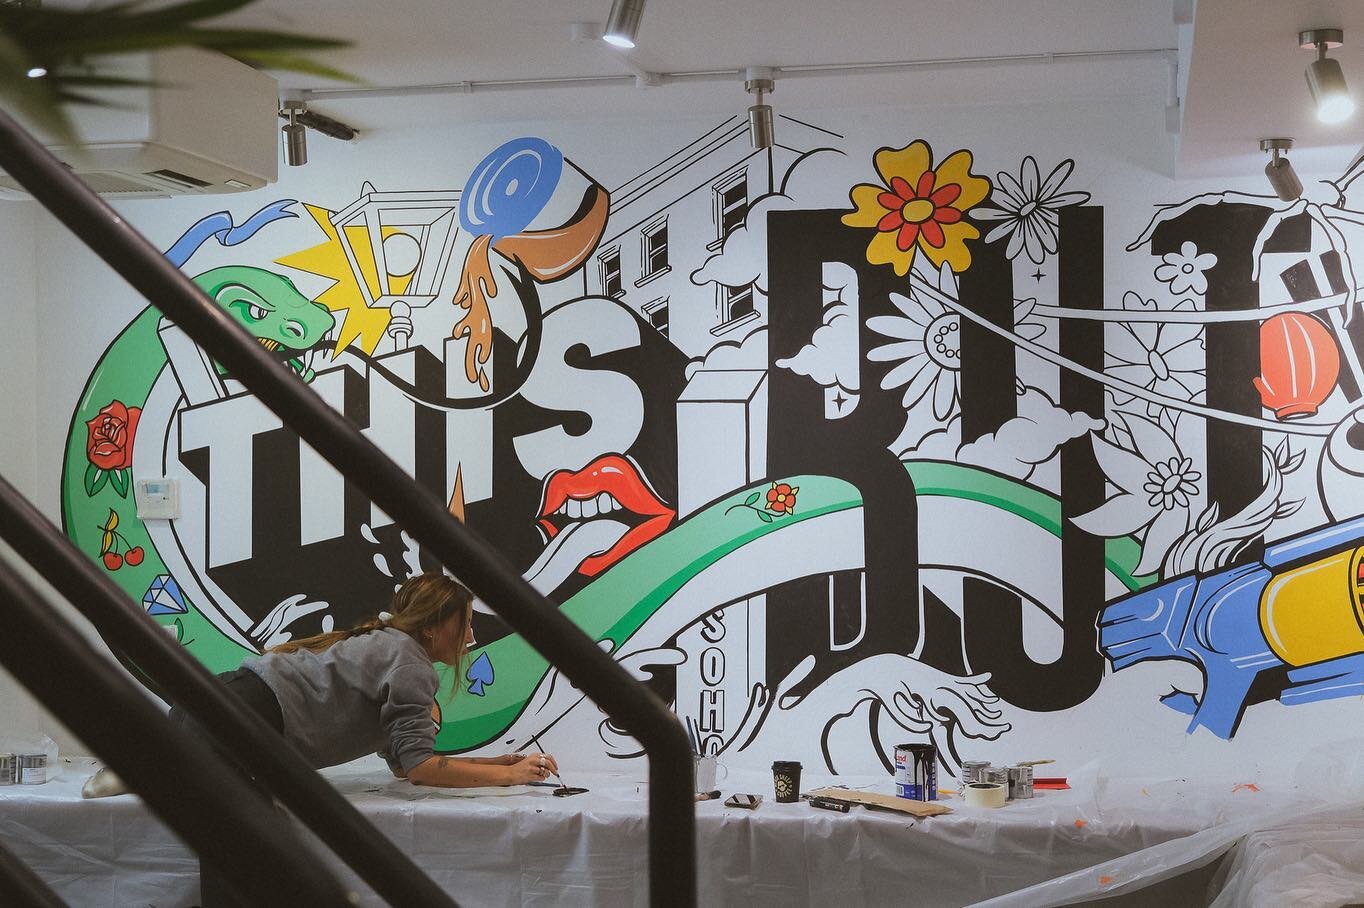 CREATE LONDON 💥
Some WIP shots of the mural I created for @create.london 

kindly captured by @alexrv92 
Showing me very much at home with my socks, coffee and messy paint station 🎨

Thnx to @blankwalls__ crew &amp; @roarartists